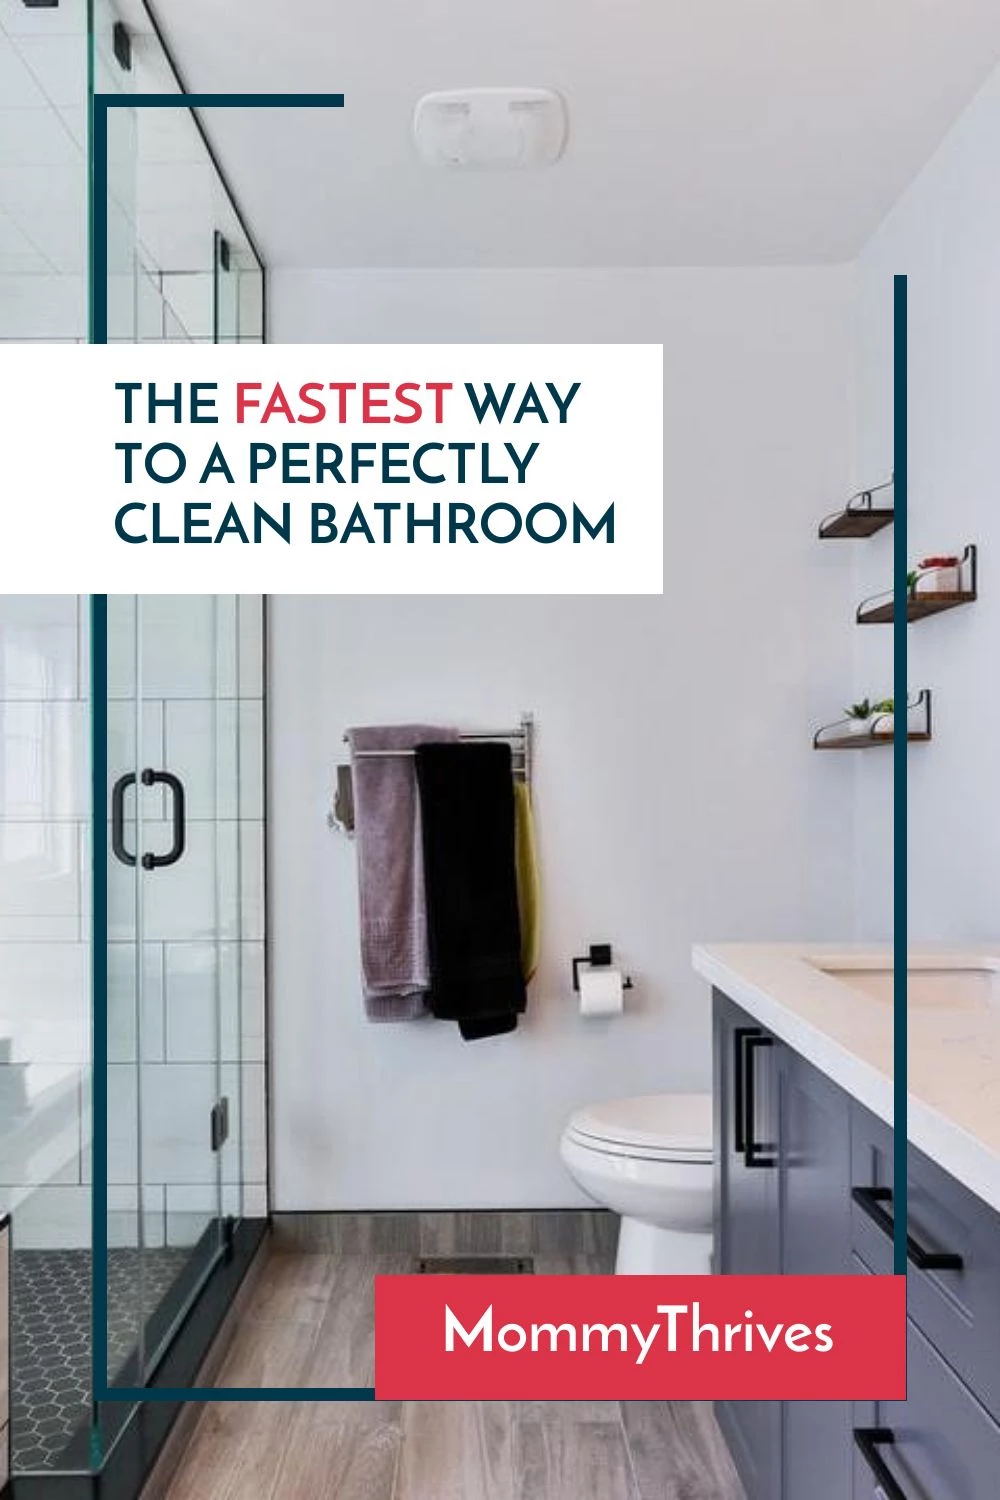 Bathroom Cleaning Tips For A Spotless Bathroom - Best House Cleaning Tips For Bathrooms - The Fastest Way To A Perfectly Clean Bathroom